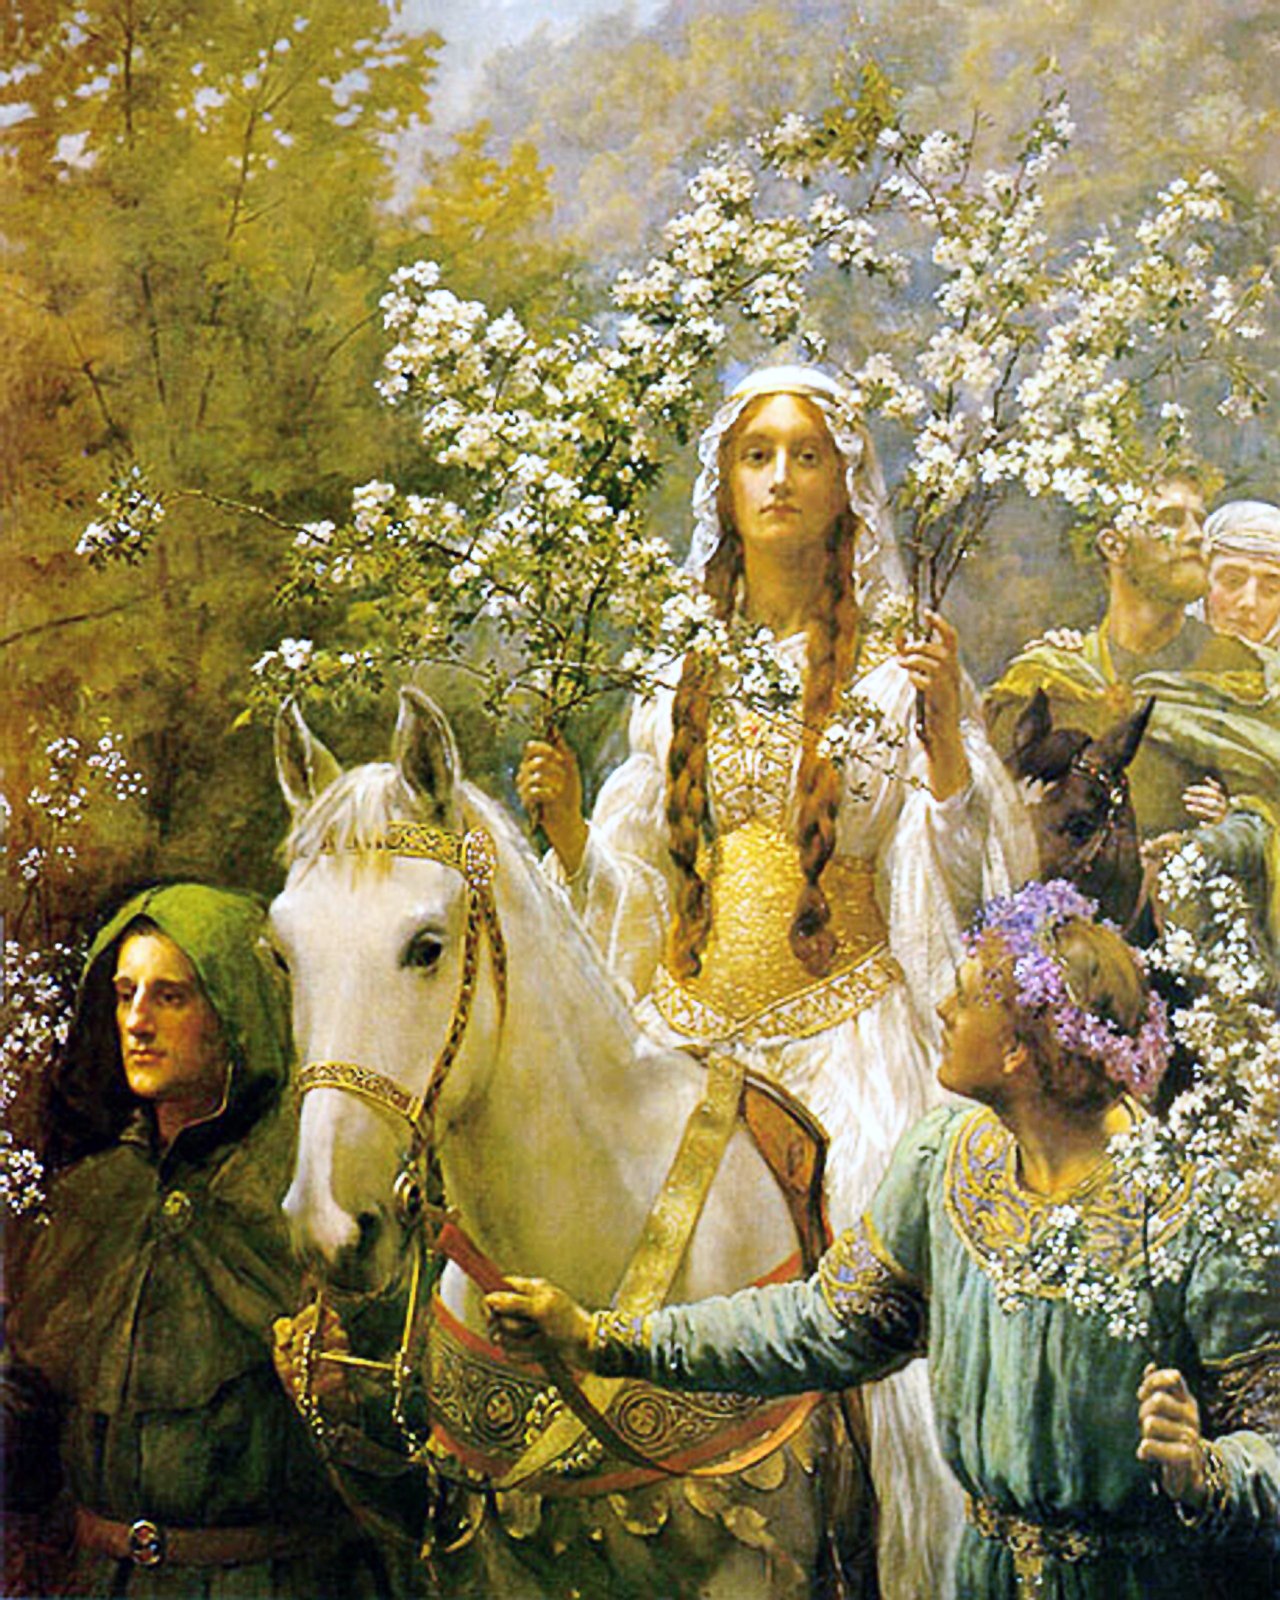 Happy May Day to all of our sisters! You're all May Queens in our book! | Image: &quot;Queen Guinevere's Maying&quot; by John Collier. Currently in the collections of the Cartwright Hall Art Gallery, part of the @bradfordmuseums .
#dbewomen #mayday